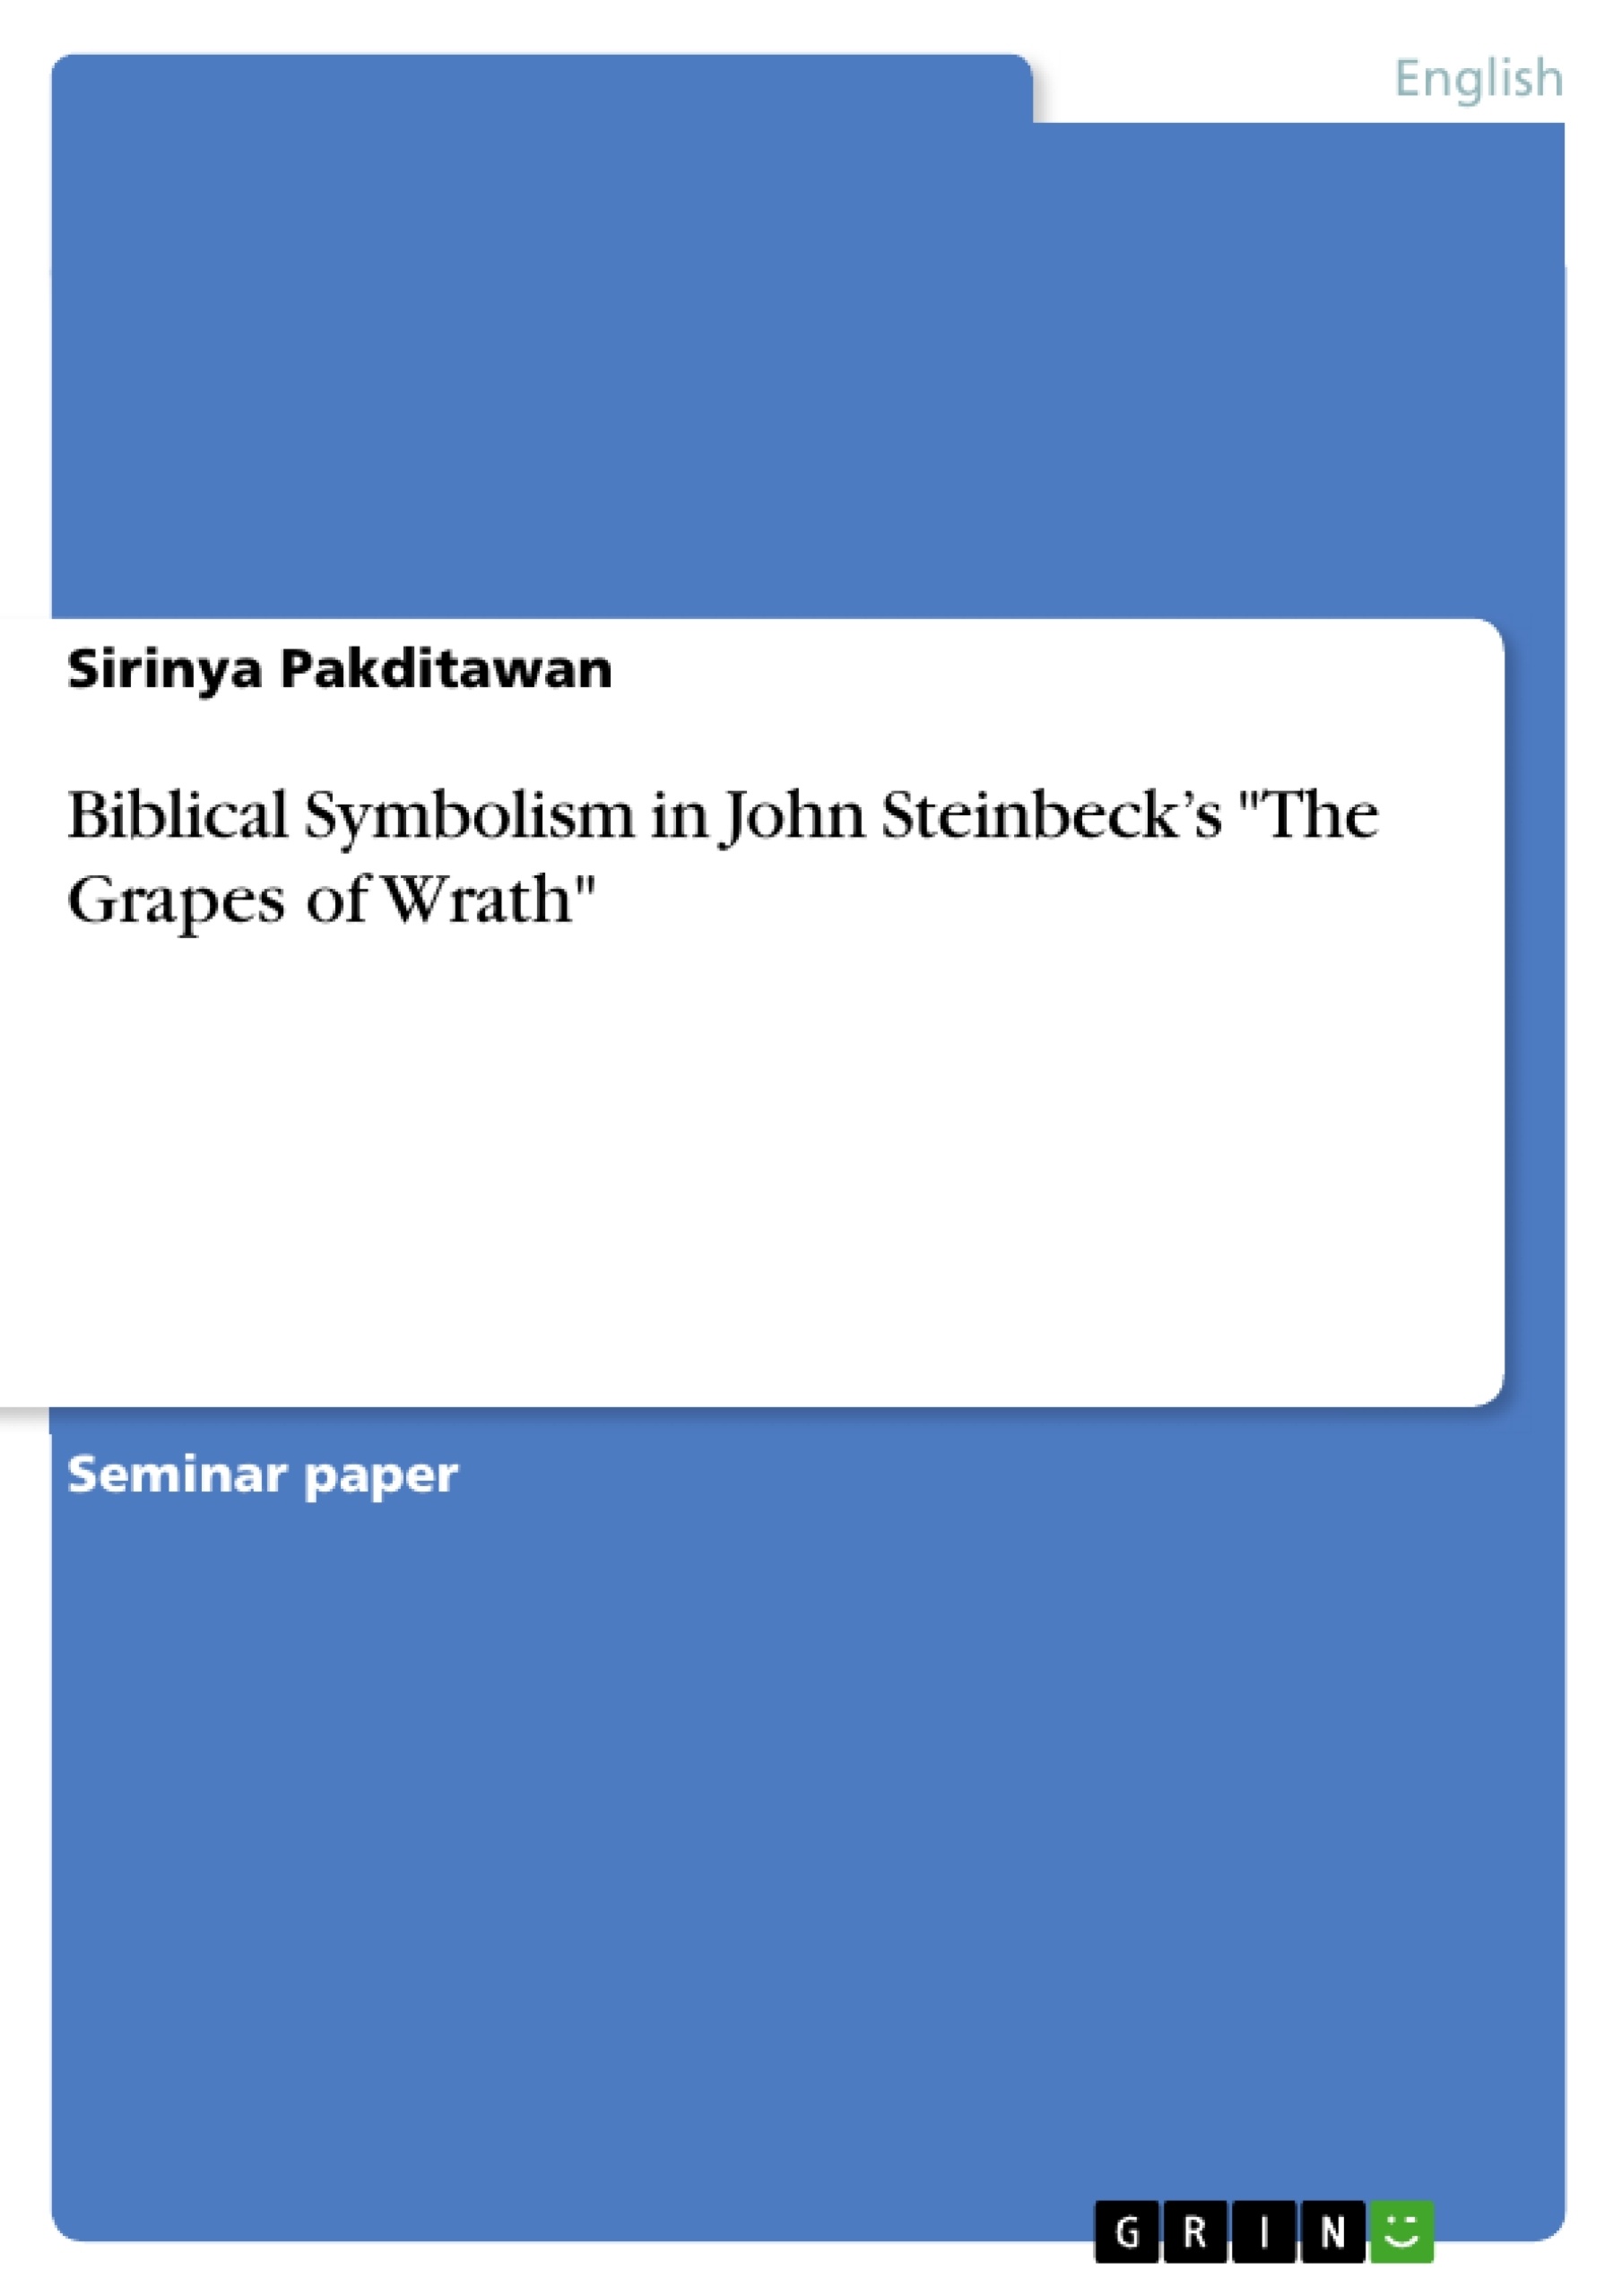 Título: Biblical Symbolism in John Steinbeck’s "The Grapes of Wrath"